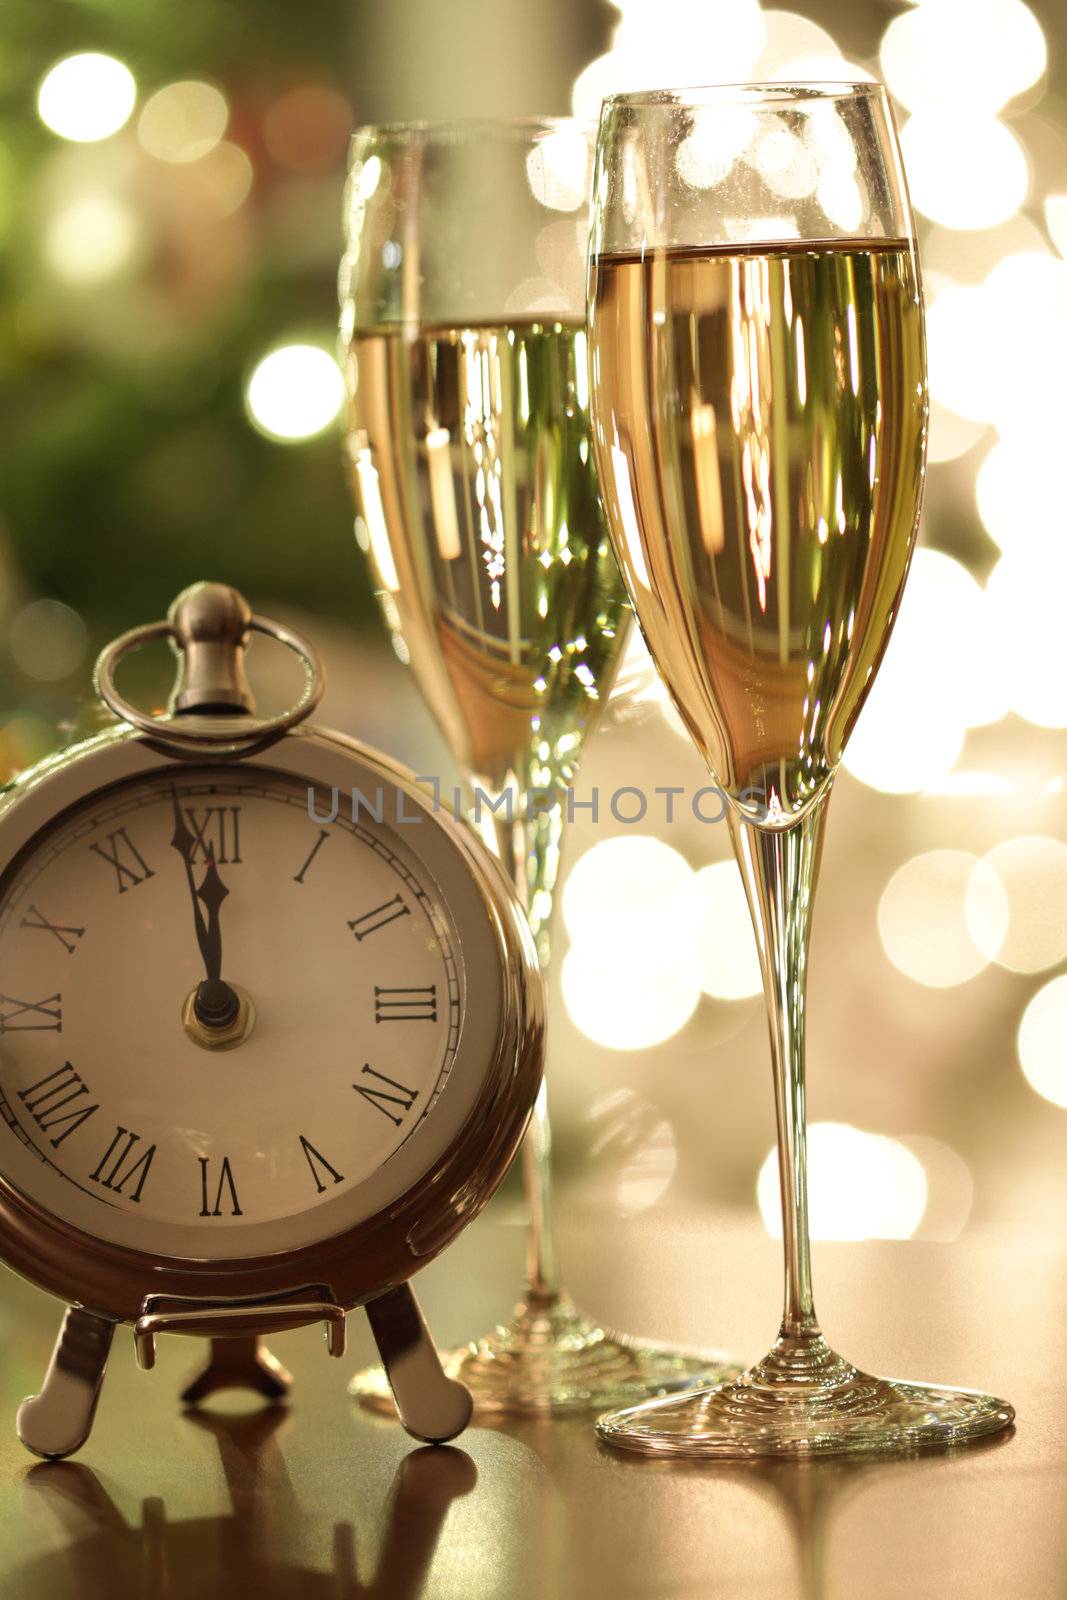 Countdown to celebrations with champagne by Sandralise